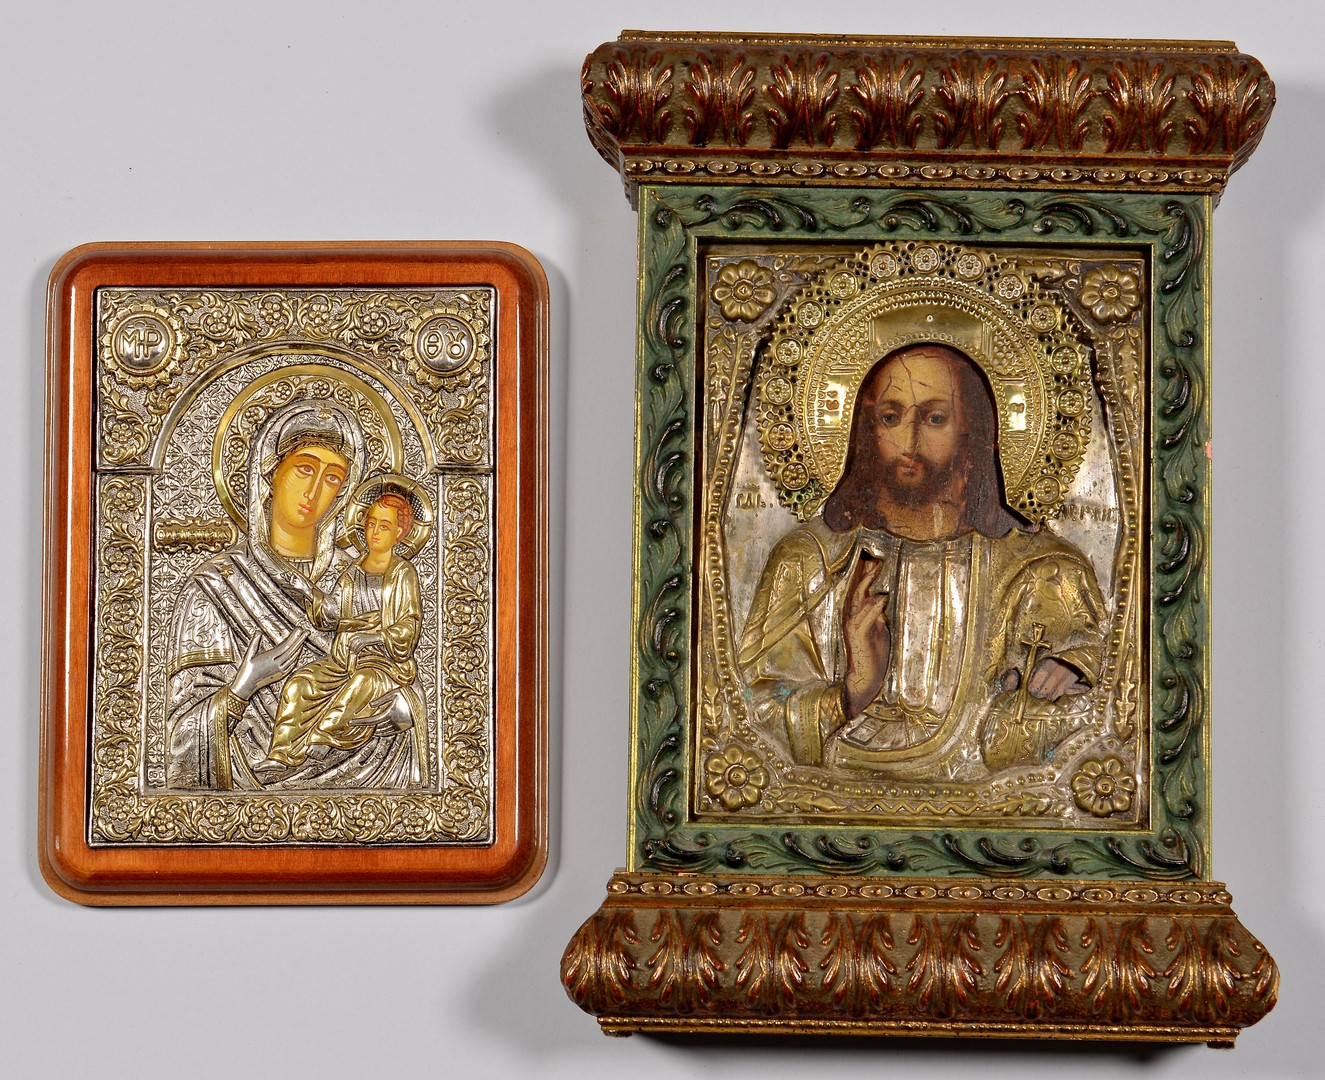 Lot 226: Grouping of 4 Russian and Greek Icons